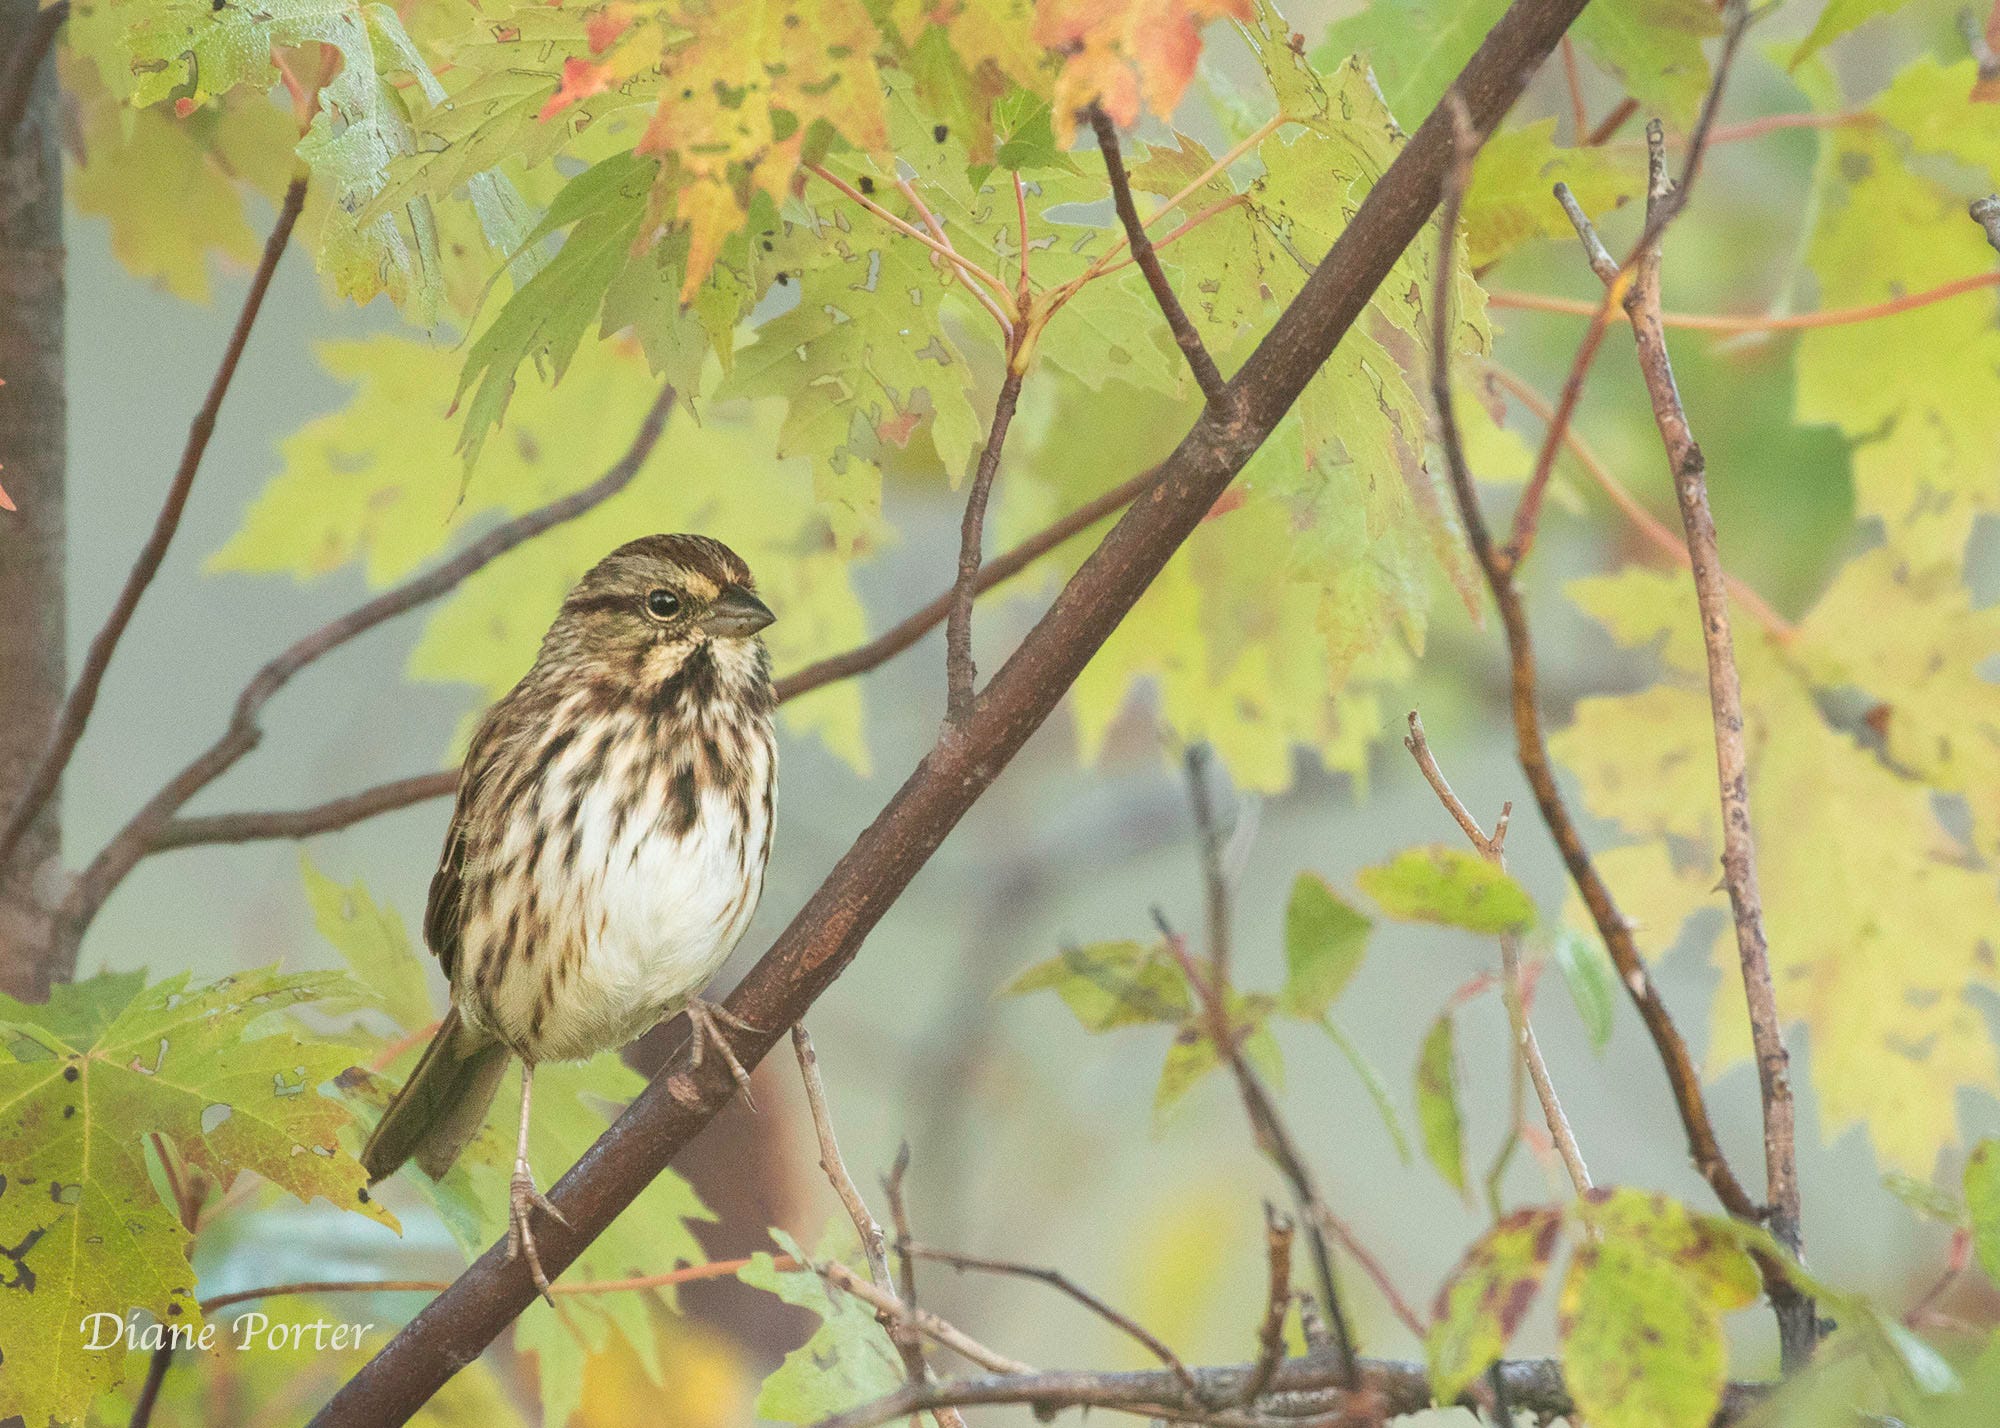 Song Sparrow perched in a tree with changing fall foliage